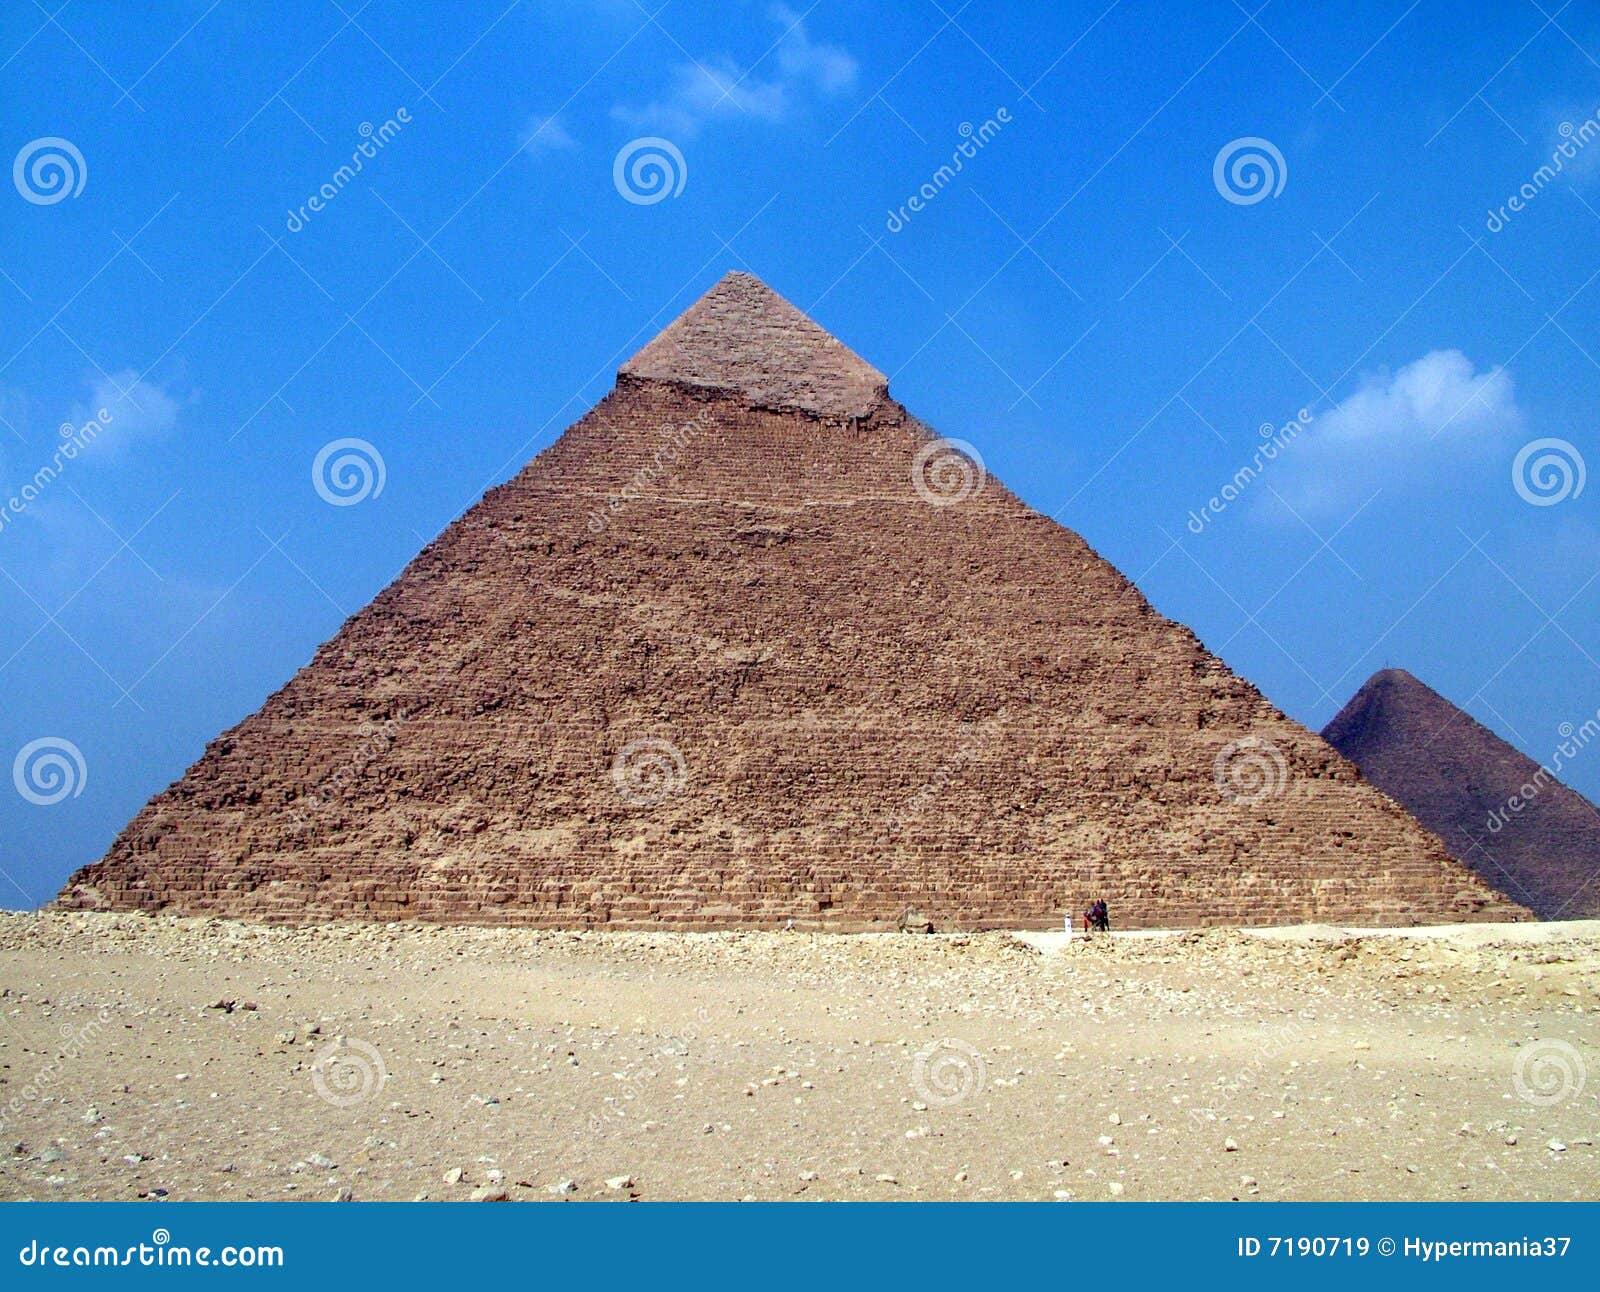 Pyramid in egypt stock image. Image of east, humankind - 7190719